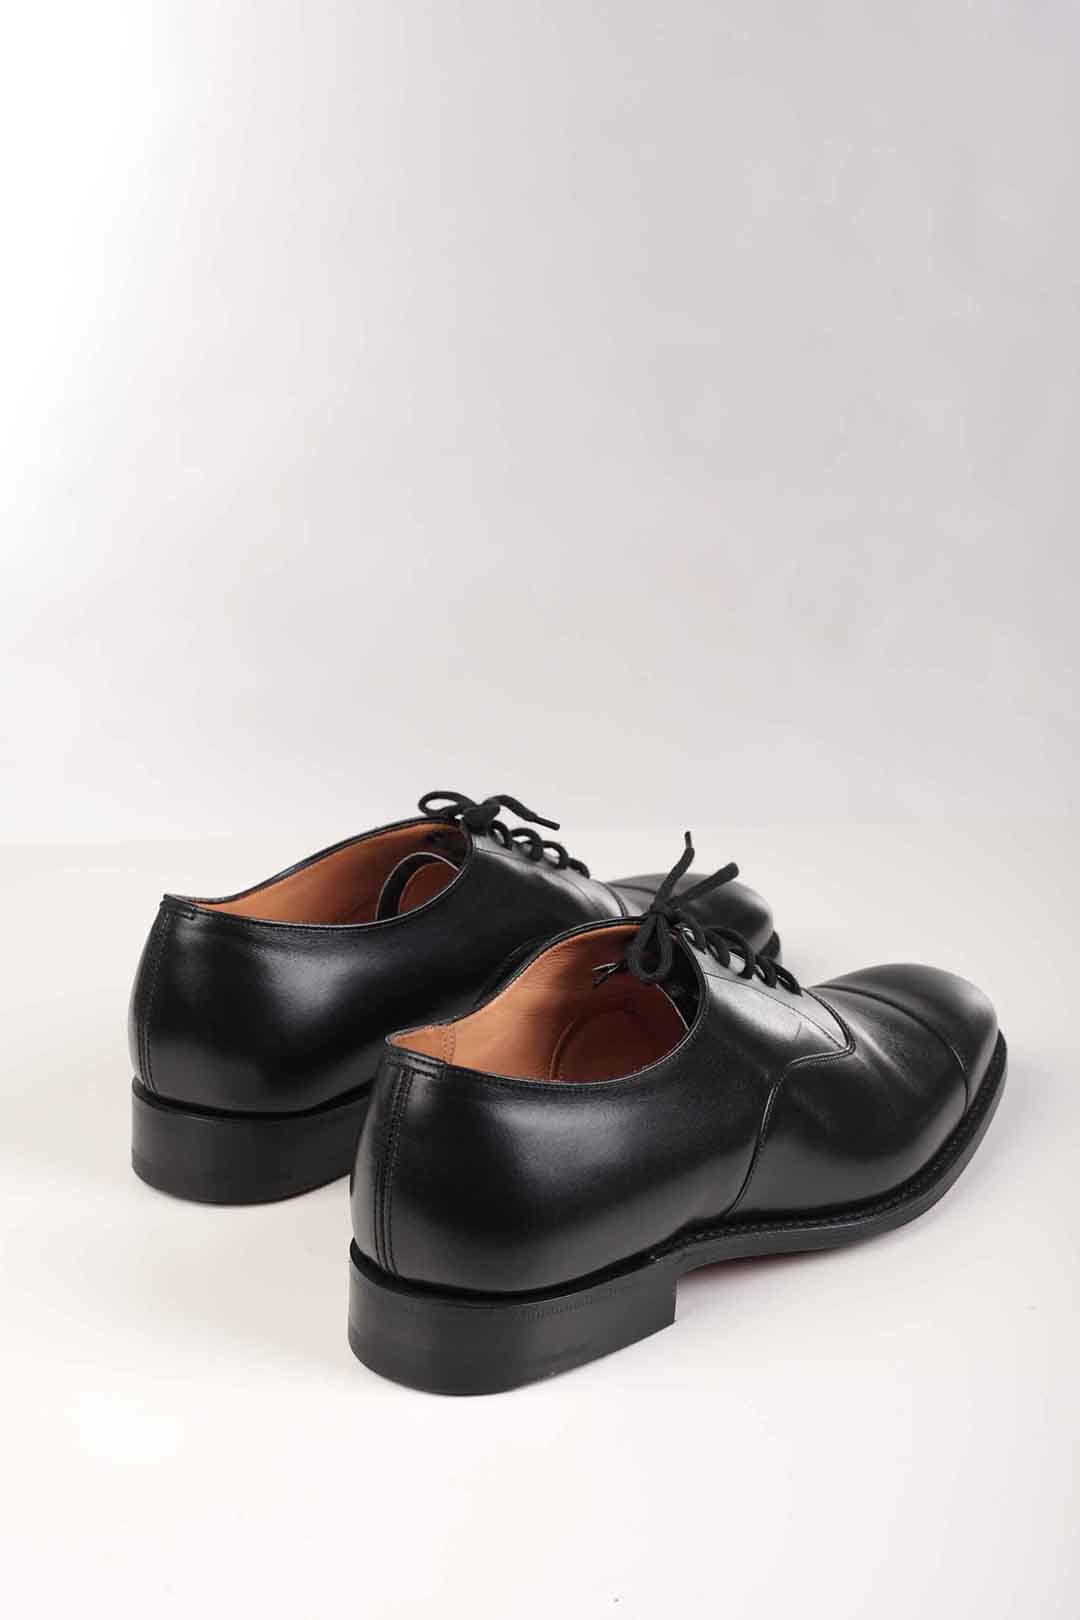 Church's Brushed Leather CONSUL Oxford Shoes men - Glamood Outlet